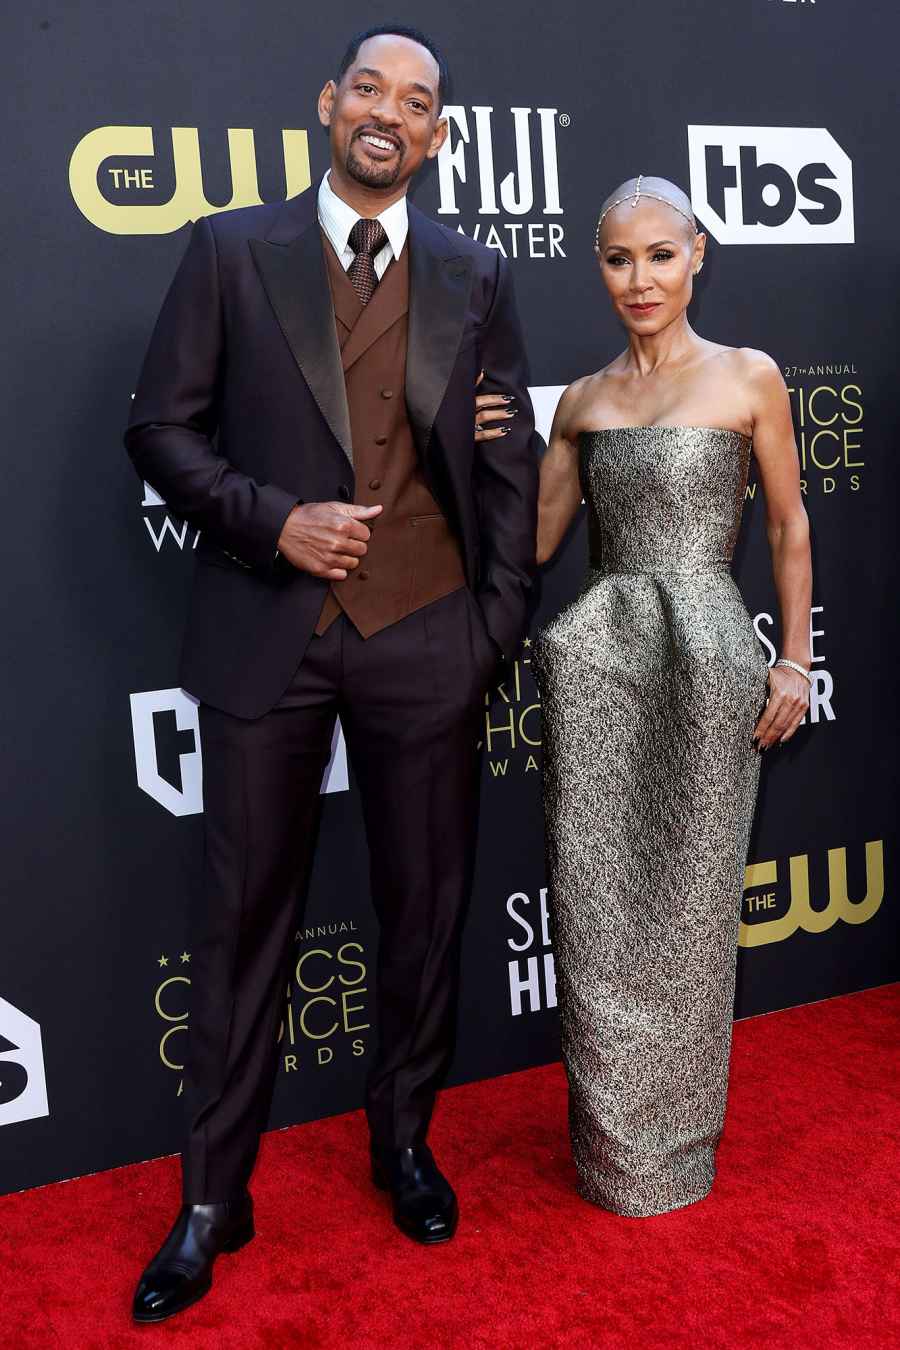 Will Smith and Jada Pinkett Smith Hottest Couples on the Critics Choice Awards 2022 Red Carpet